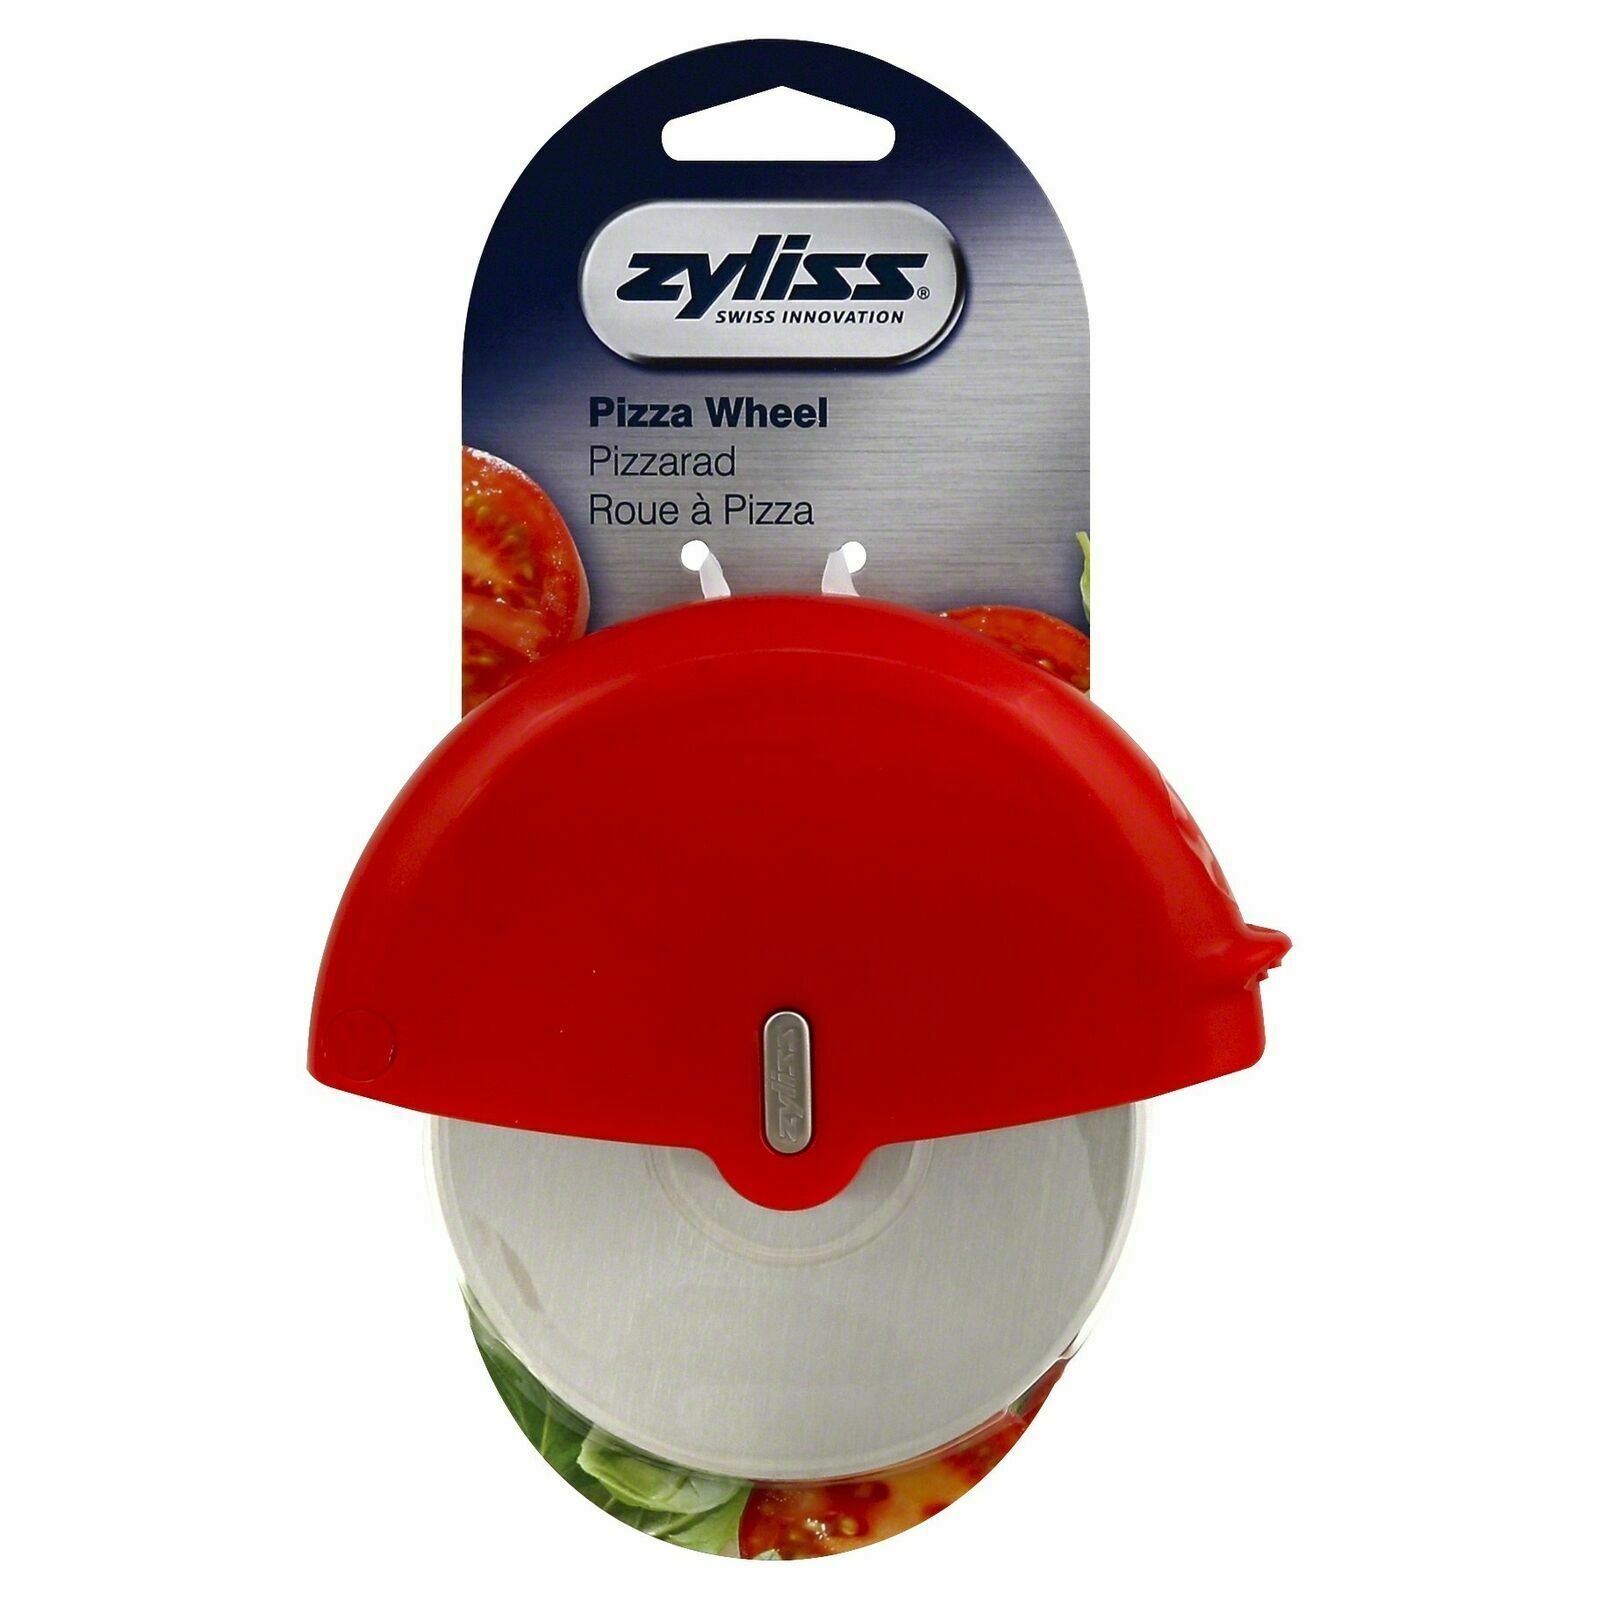 NEW Pizza Slicer W/Blde Cvr, PartNo 30810, by Zyliss Usa Corp Stainless Steel ! - $18.88